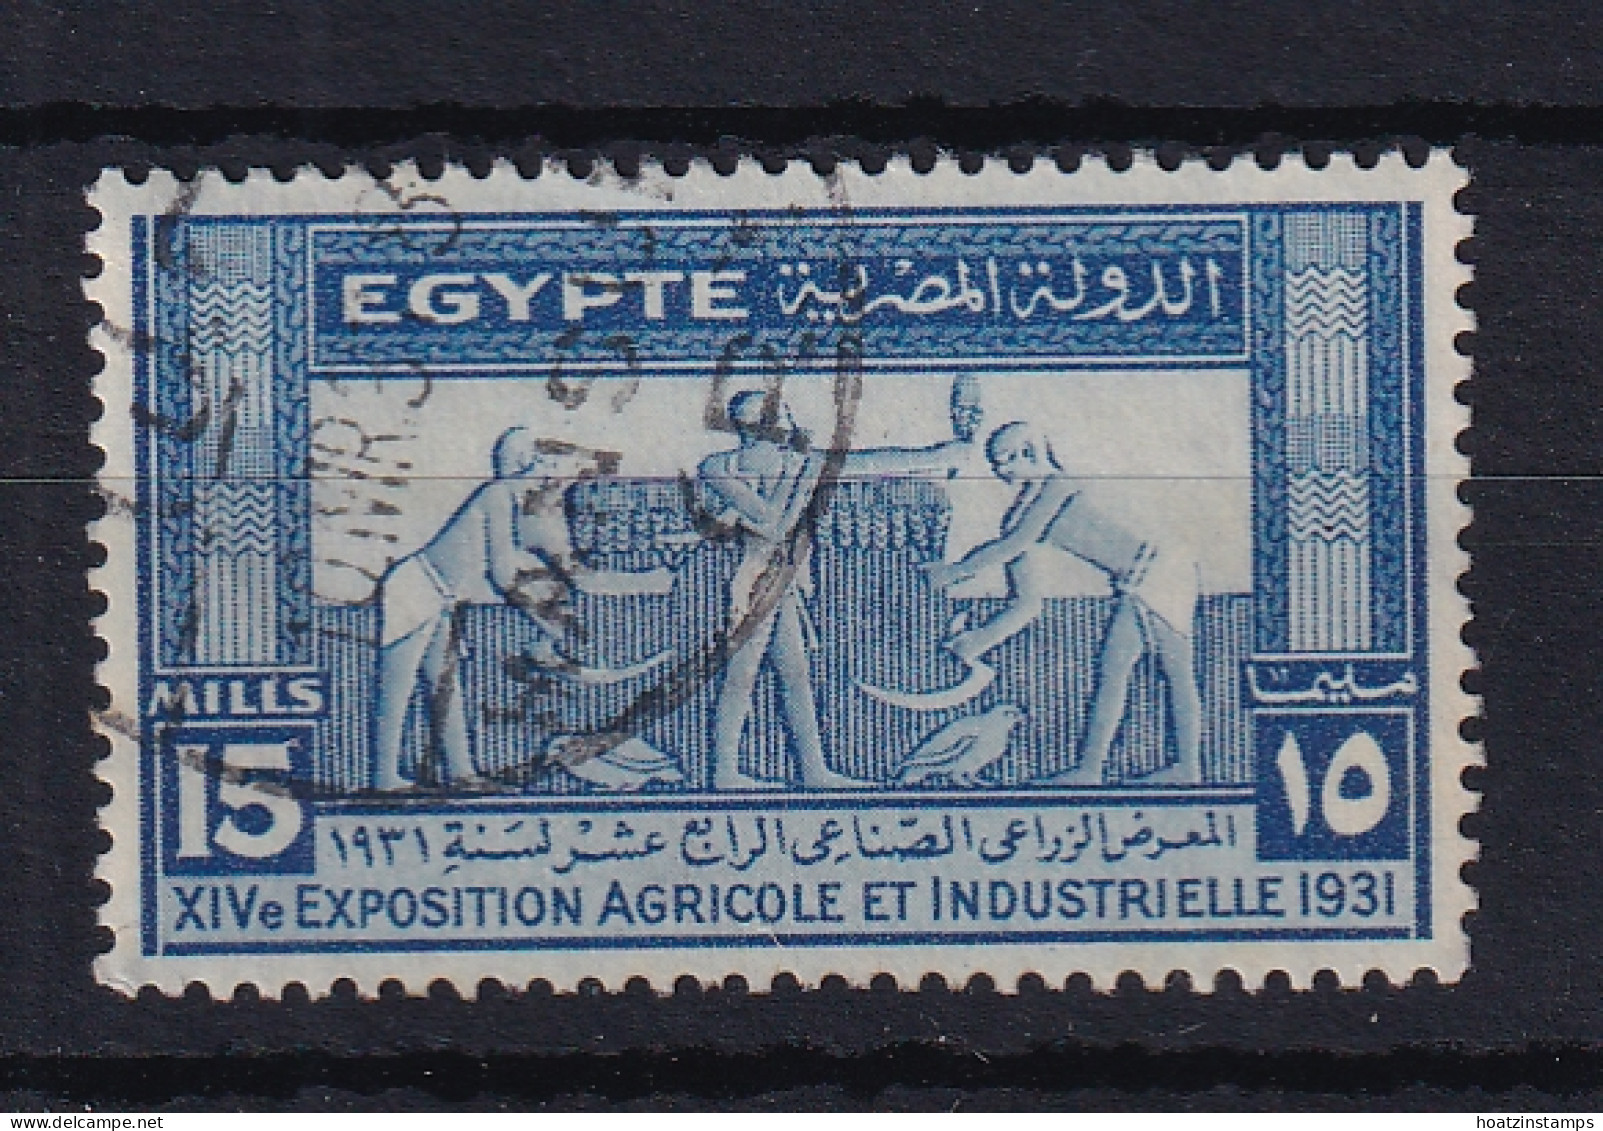 Egypt: 1931   Agricultural And Industrial Exhibition   SG184   15m    Used - Used Stamps